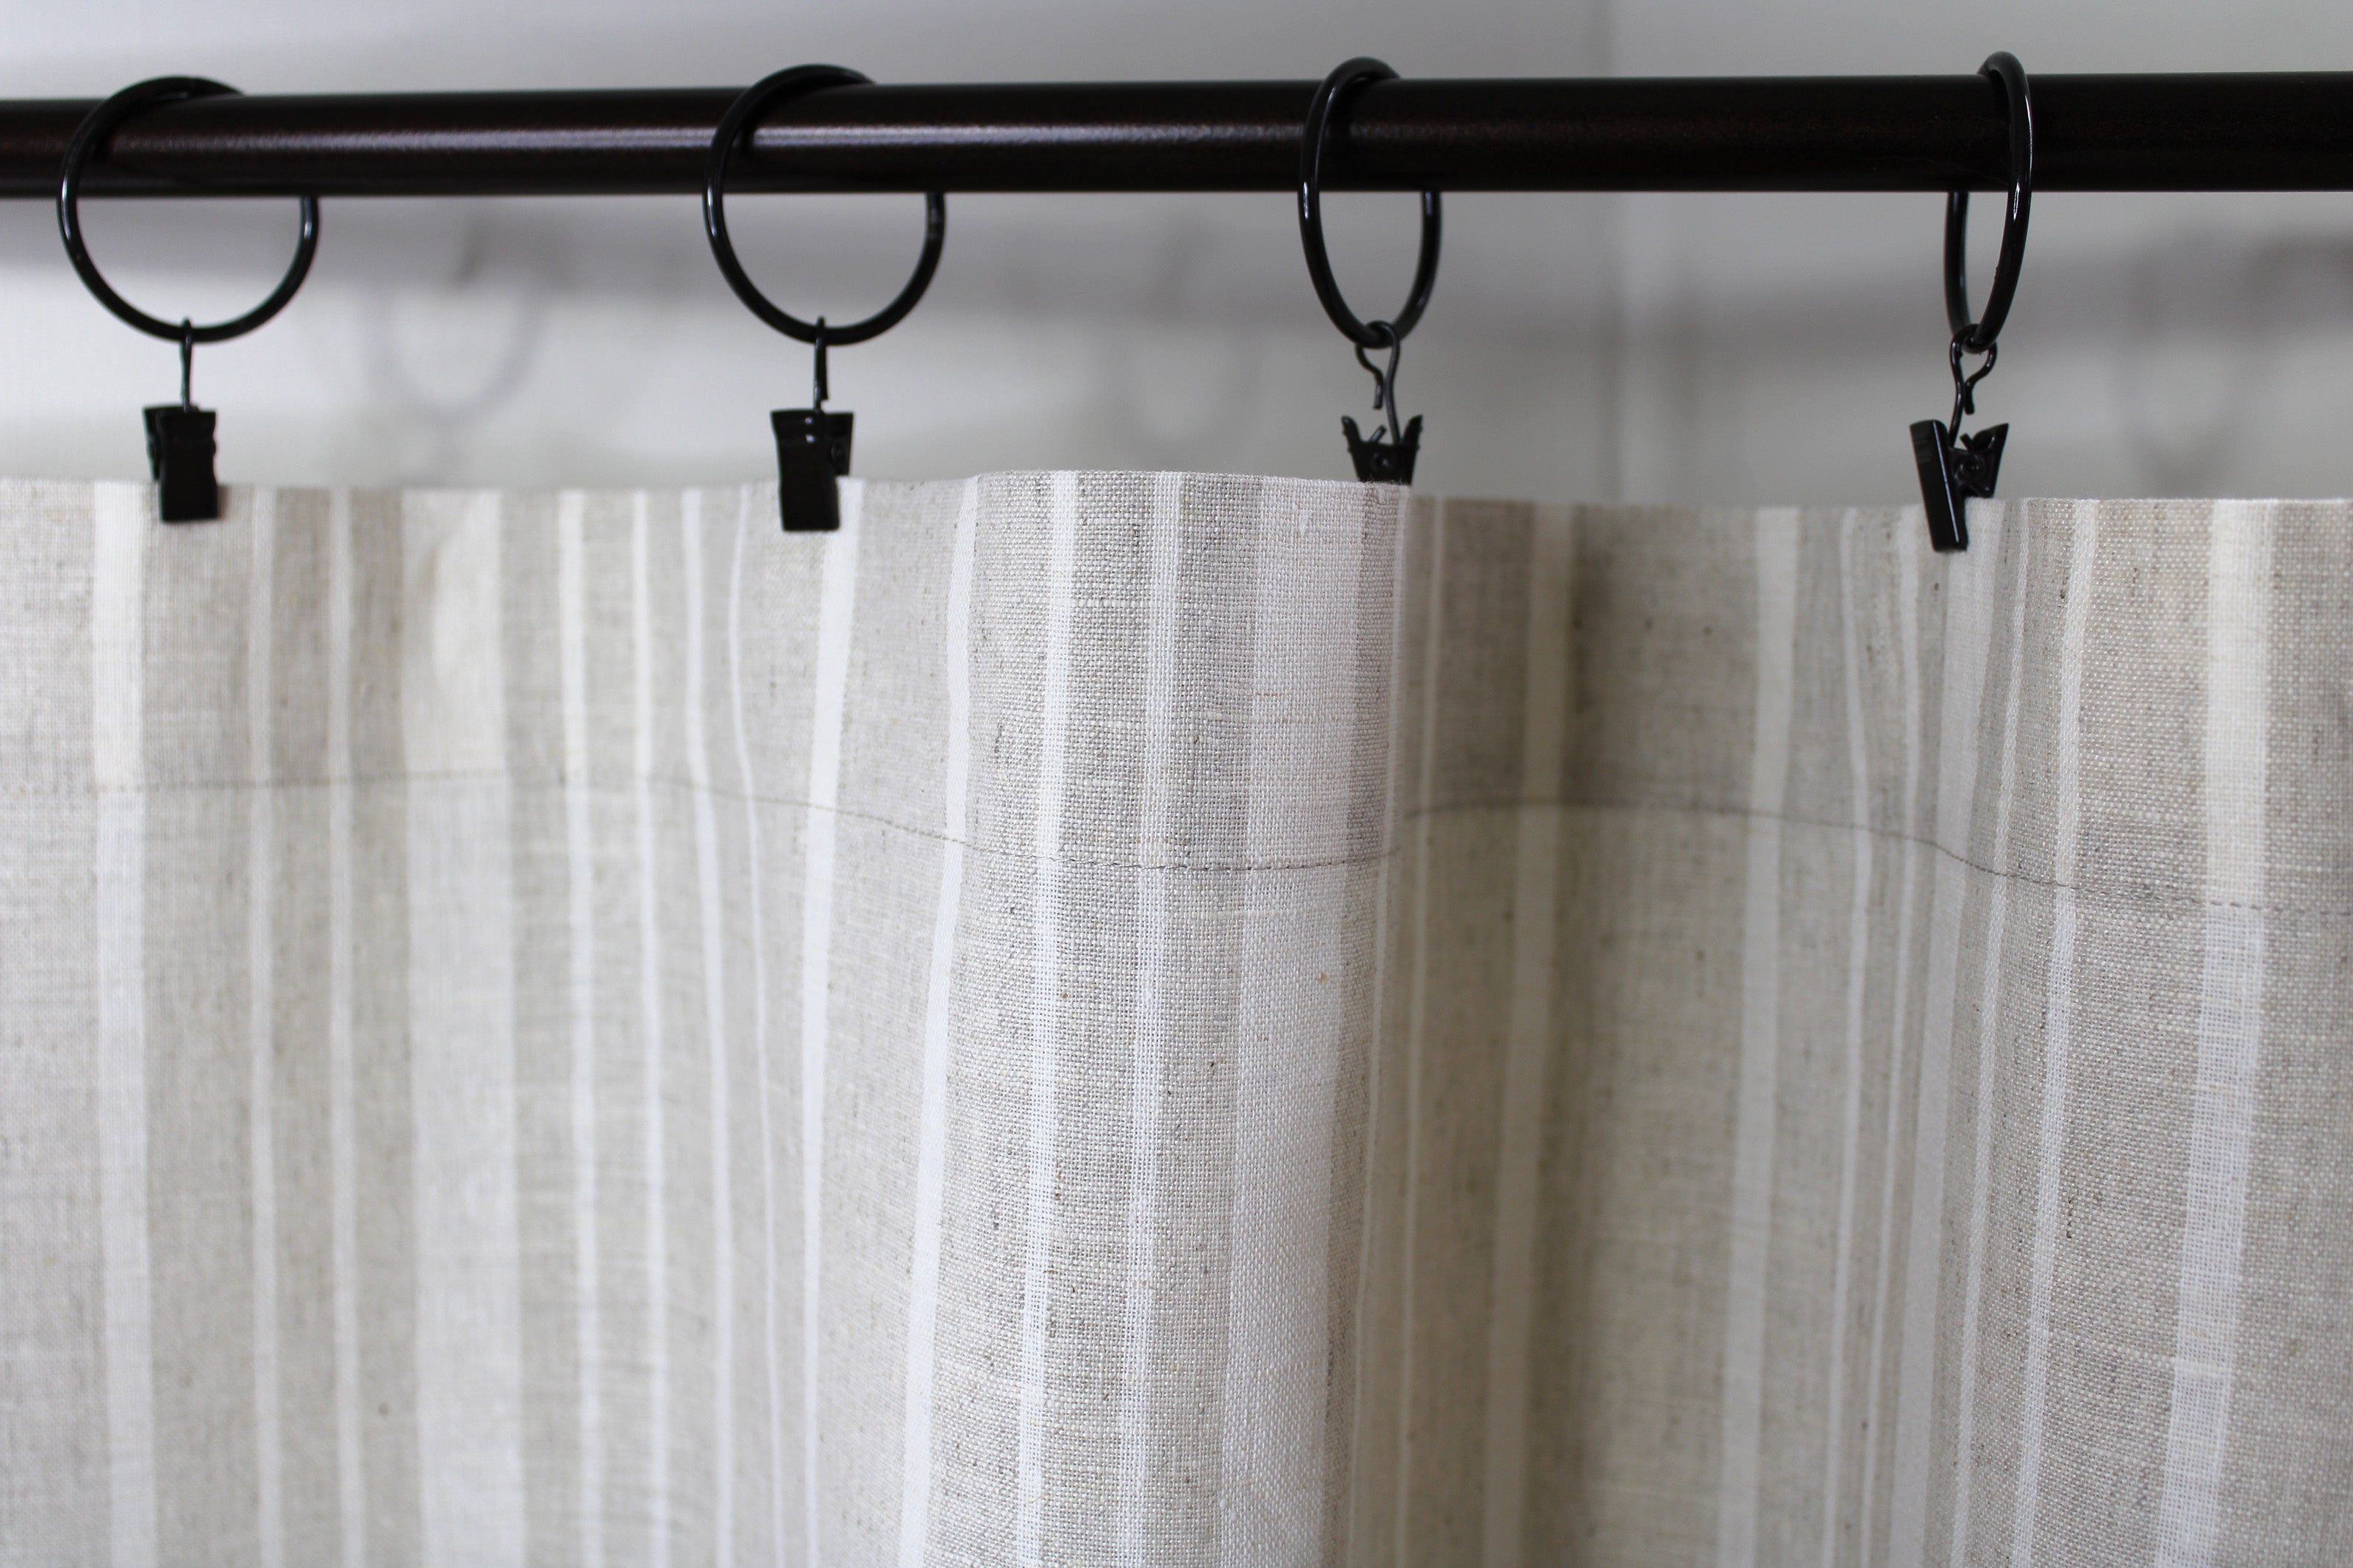 Wide Linen Curtains with Hem for clip-rings / European Striped Linen Curtains / CUSTOM Linen Curtains